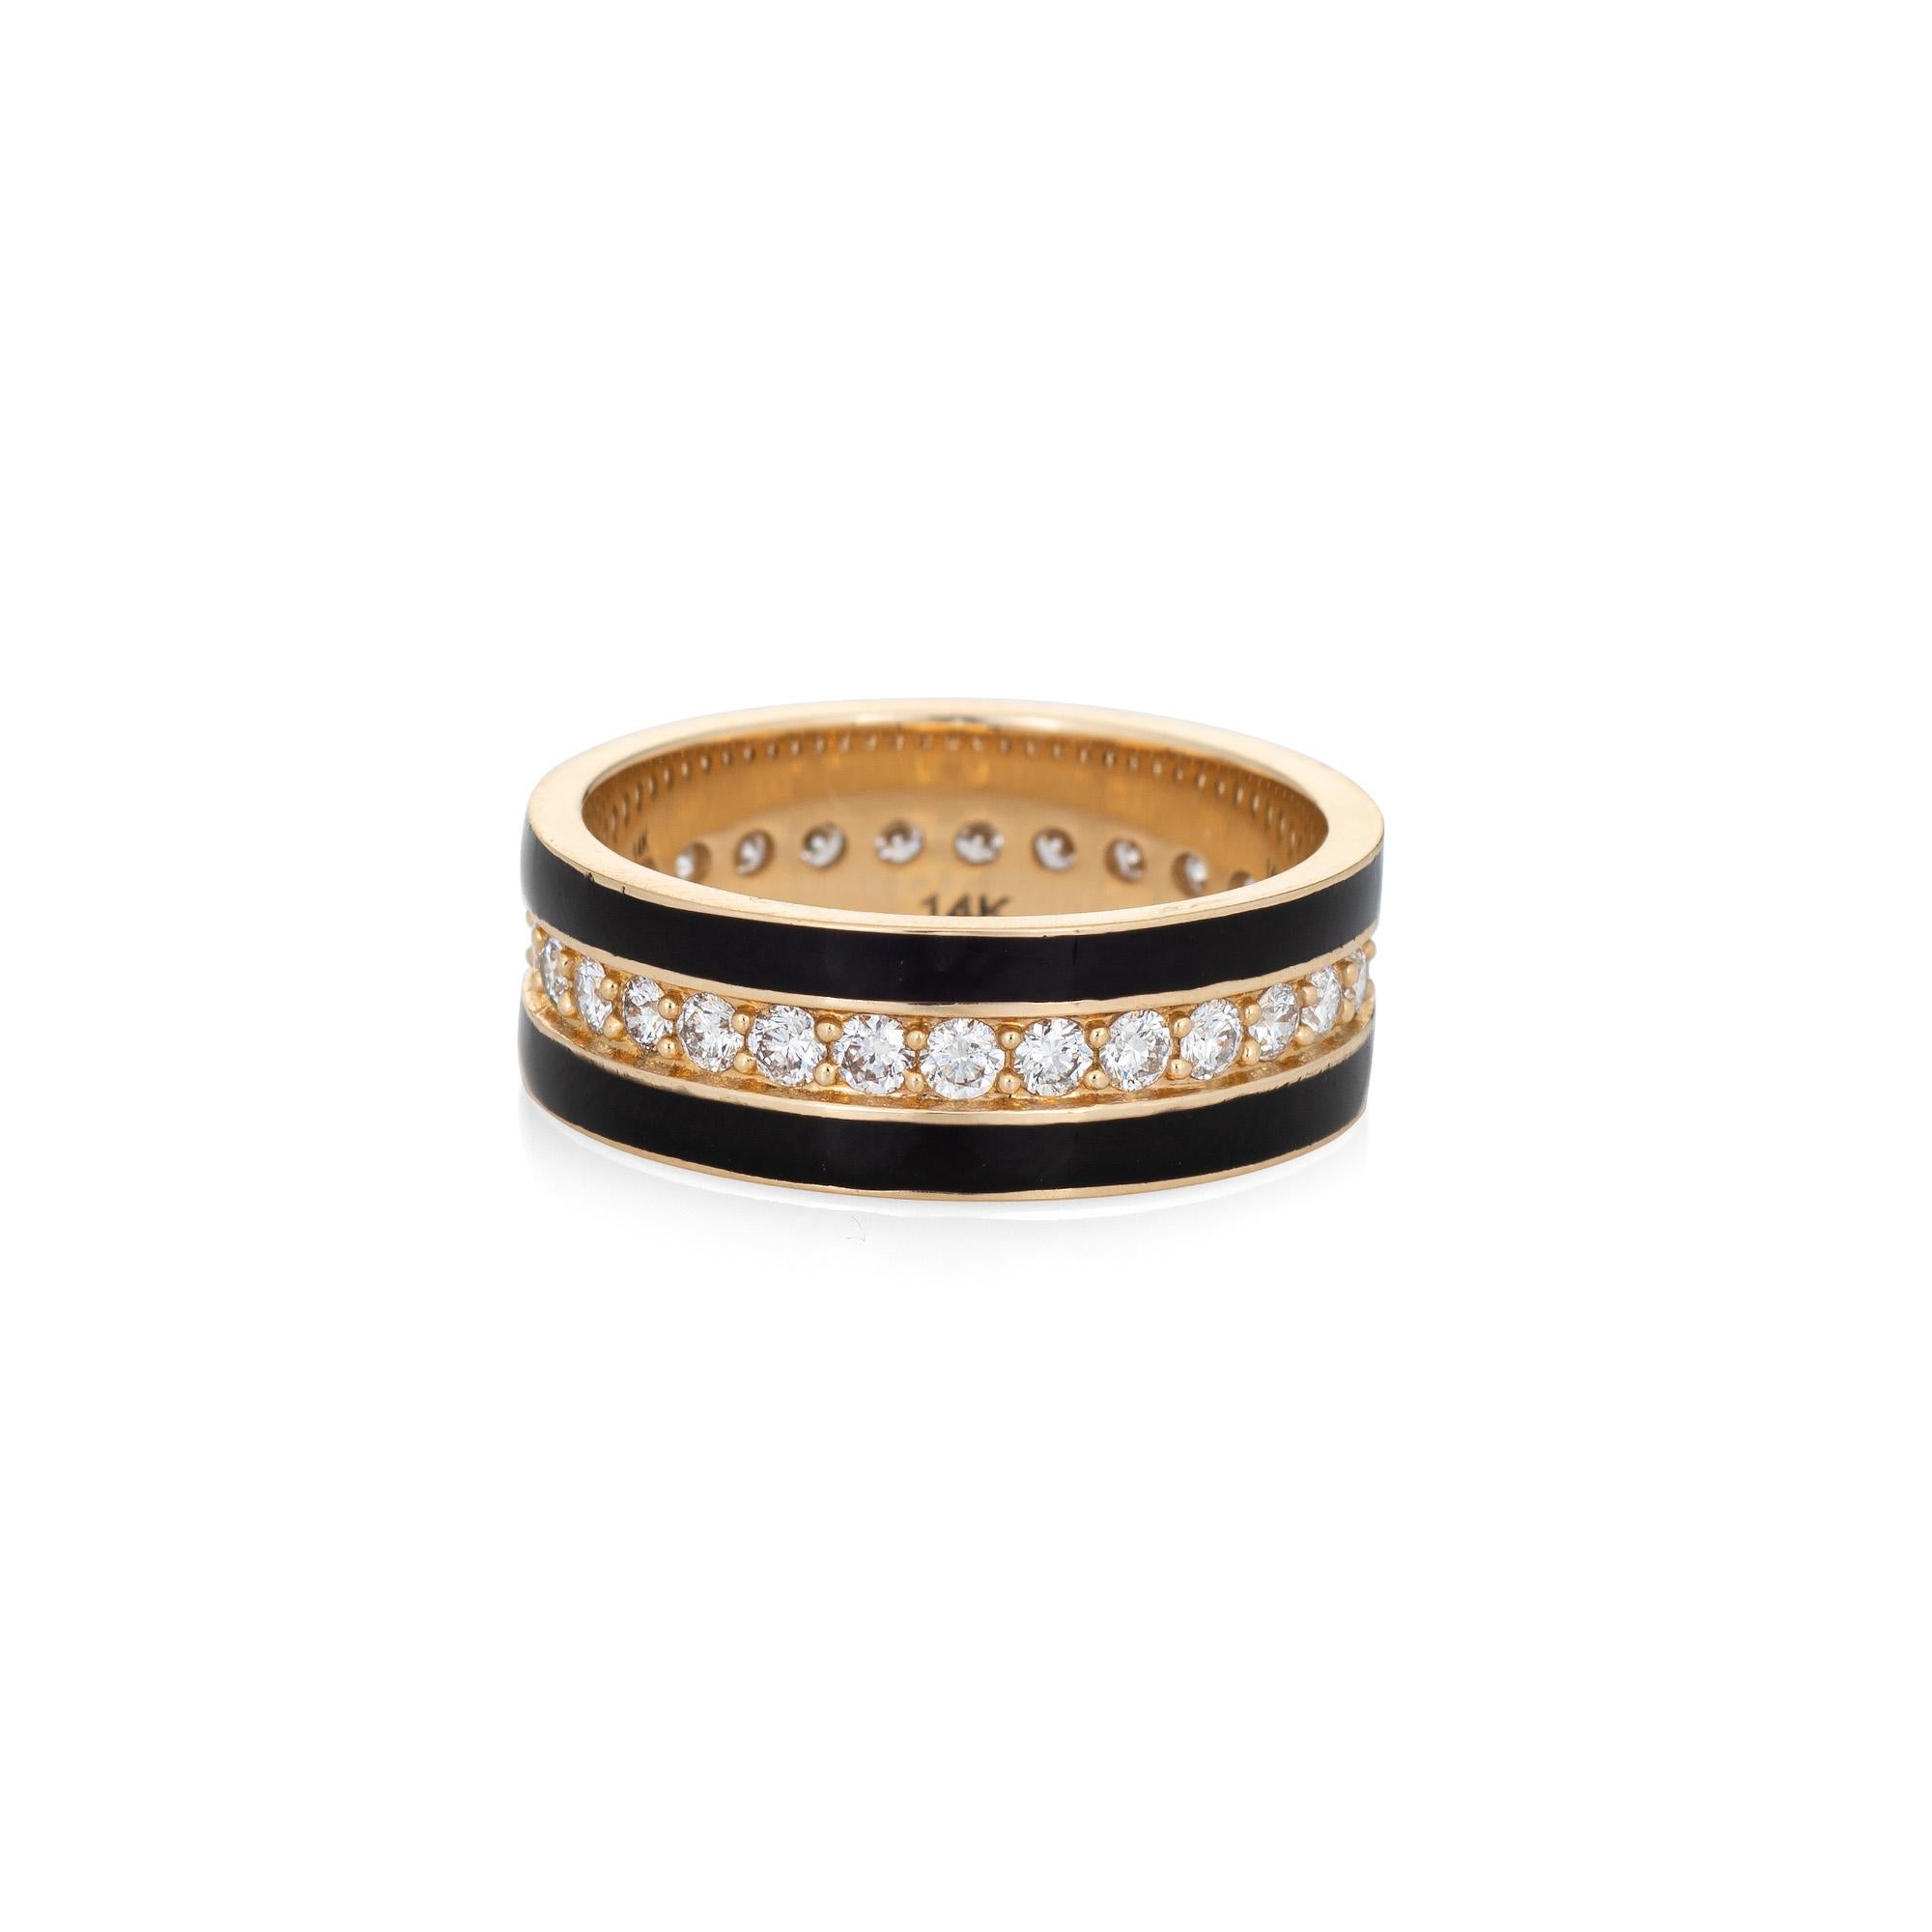 Stylish black enamel diamond eternity ring crafted in 14 karat yellow gold. 

Round brilliant cut diamonds total an estimated 0.21 carats (estimated at H-I color and SI1-2 clarity). 

With a strand of diamonds to the center and framed with black